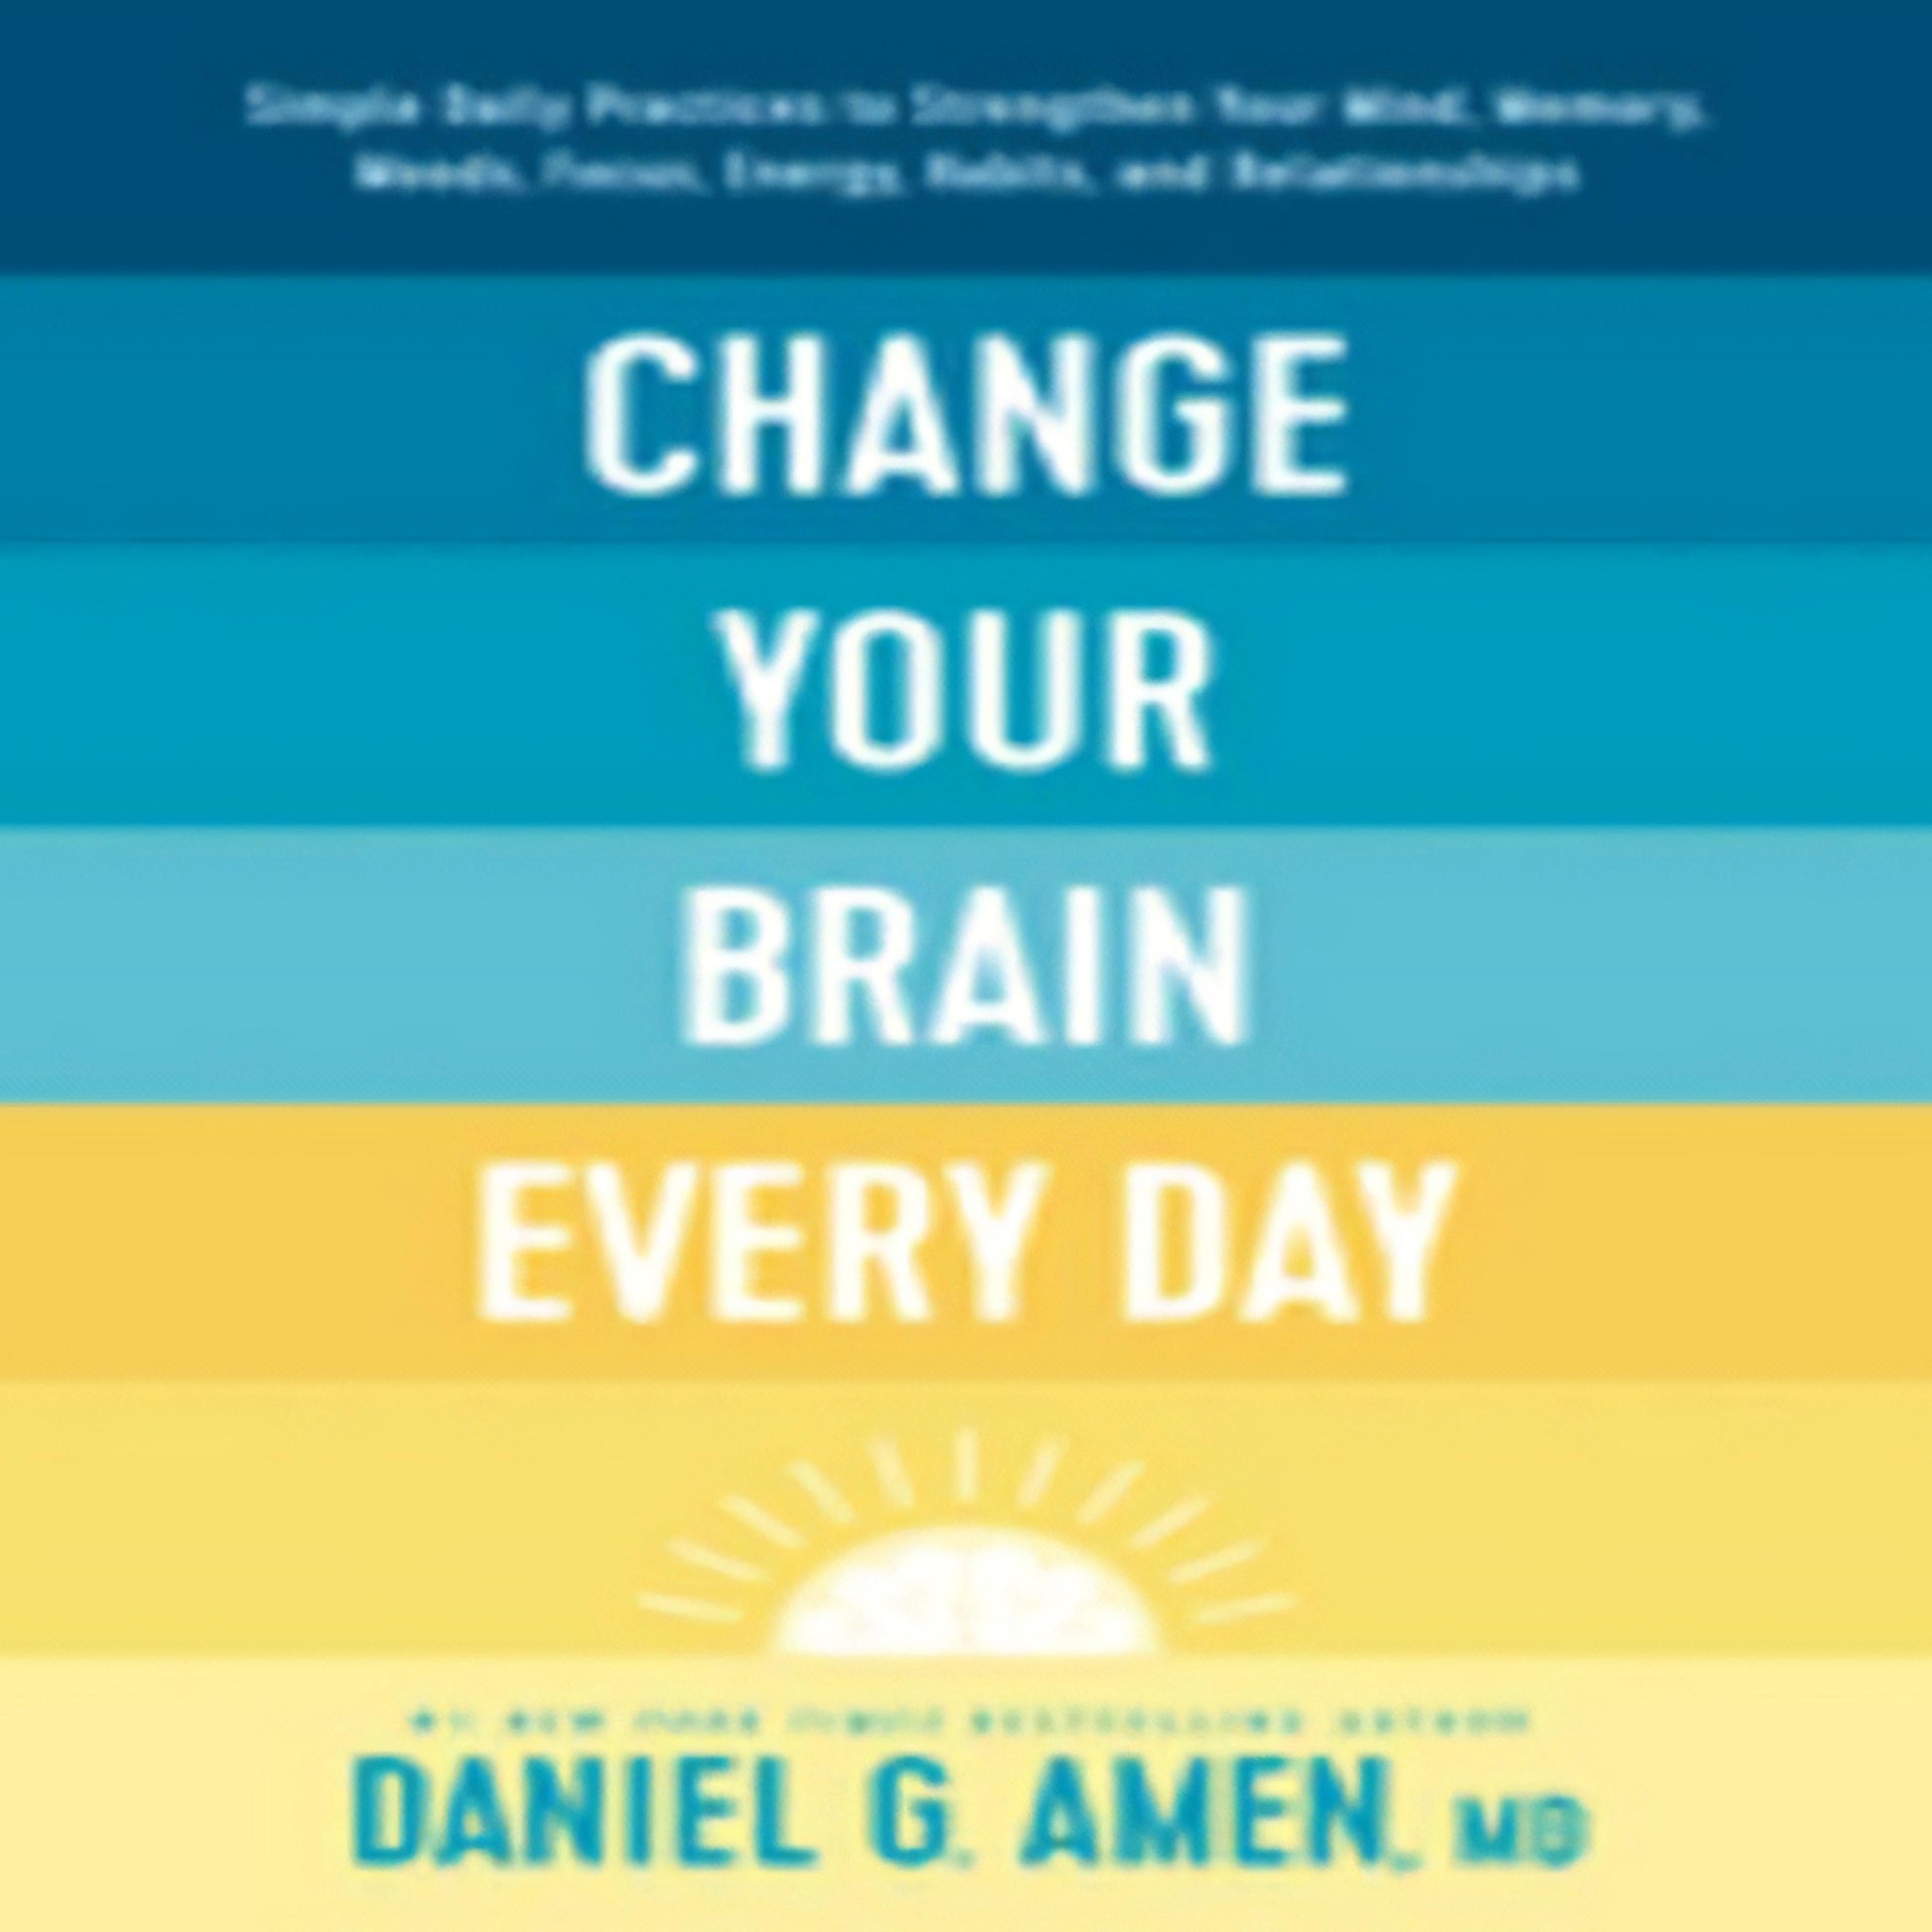 Change Your Brain Every Day: Simple Daily Practices213-031423-149645457XDPGBOOKSTORE.COM. Today's Bestsellers.